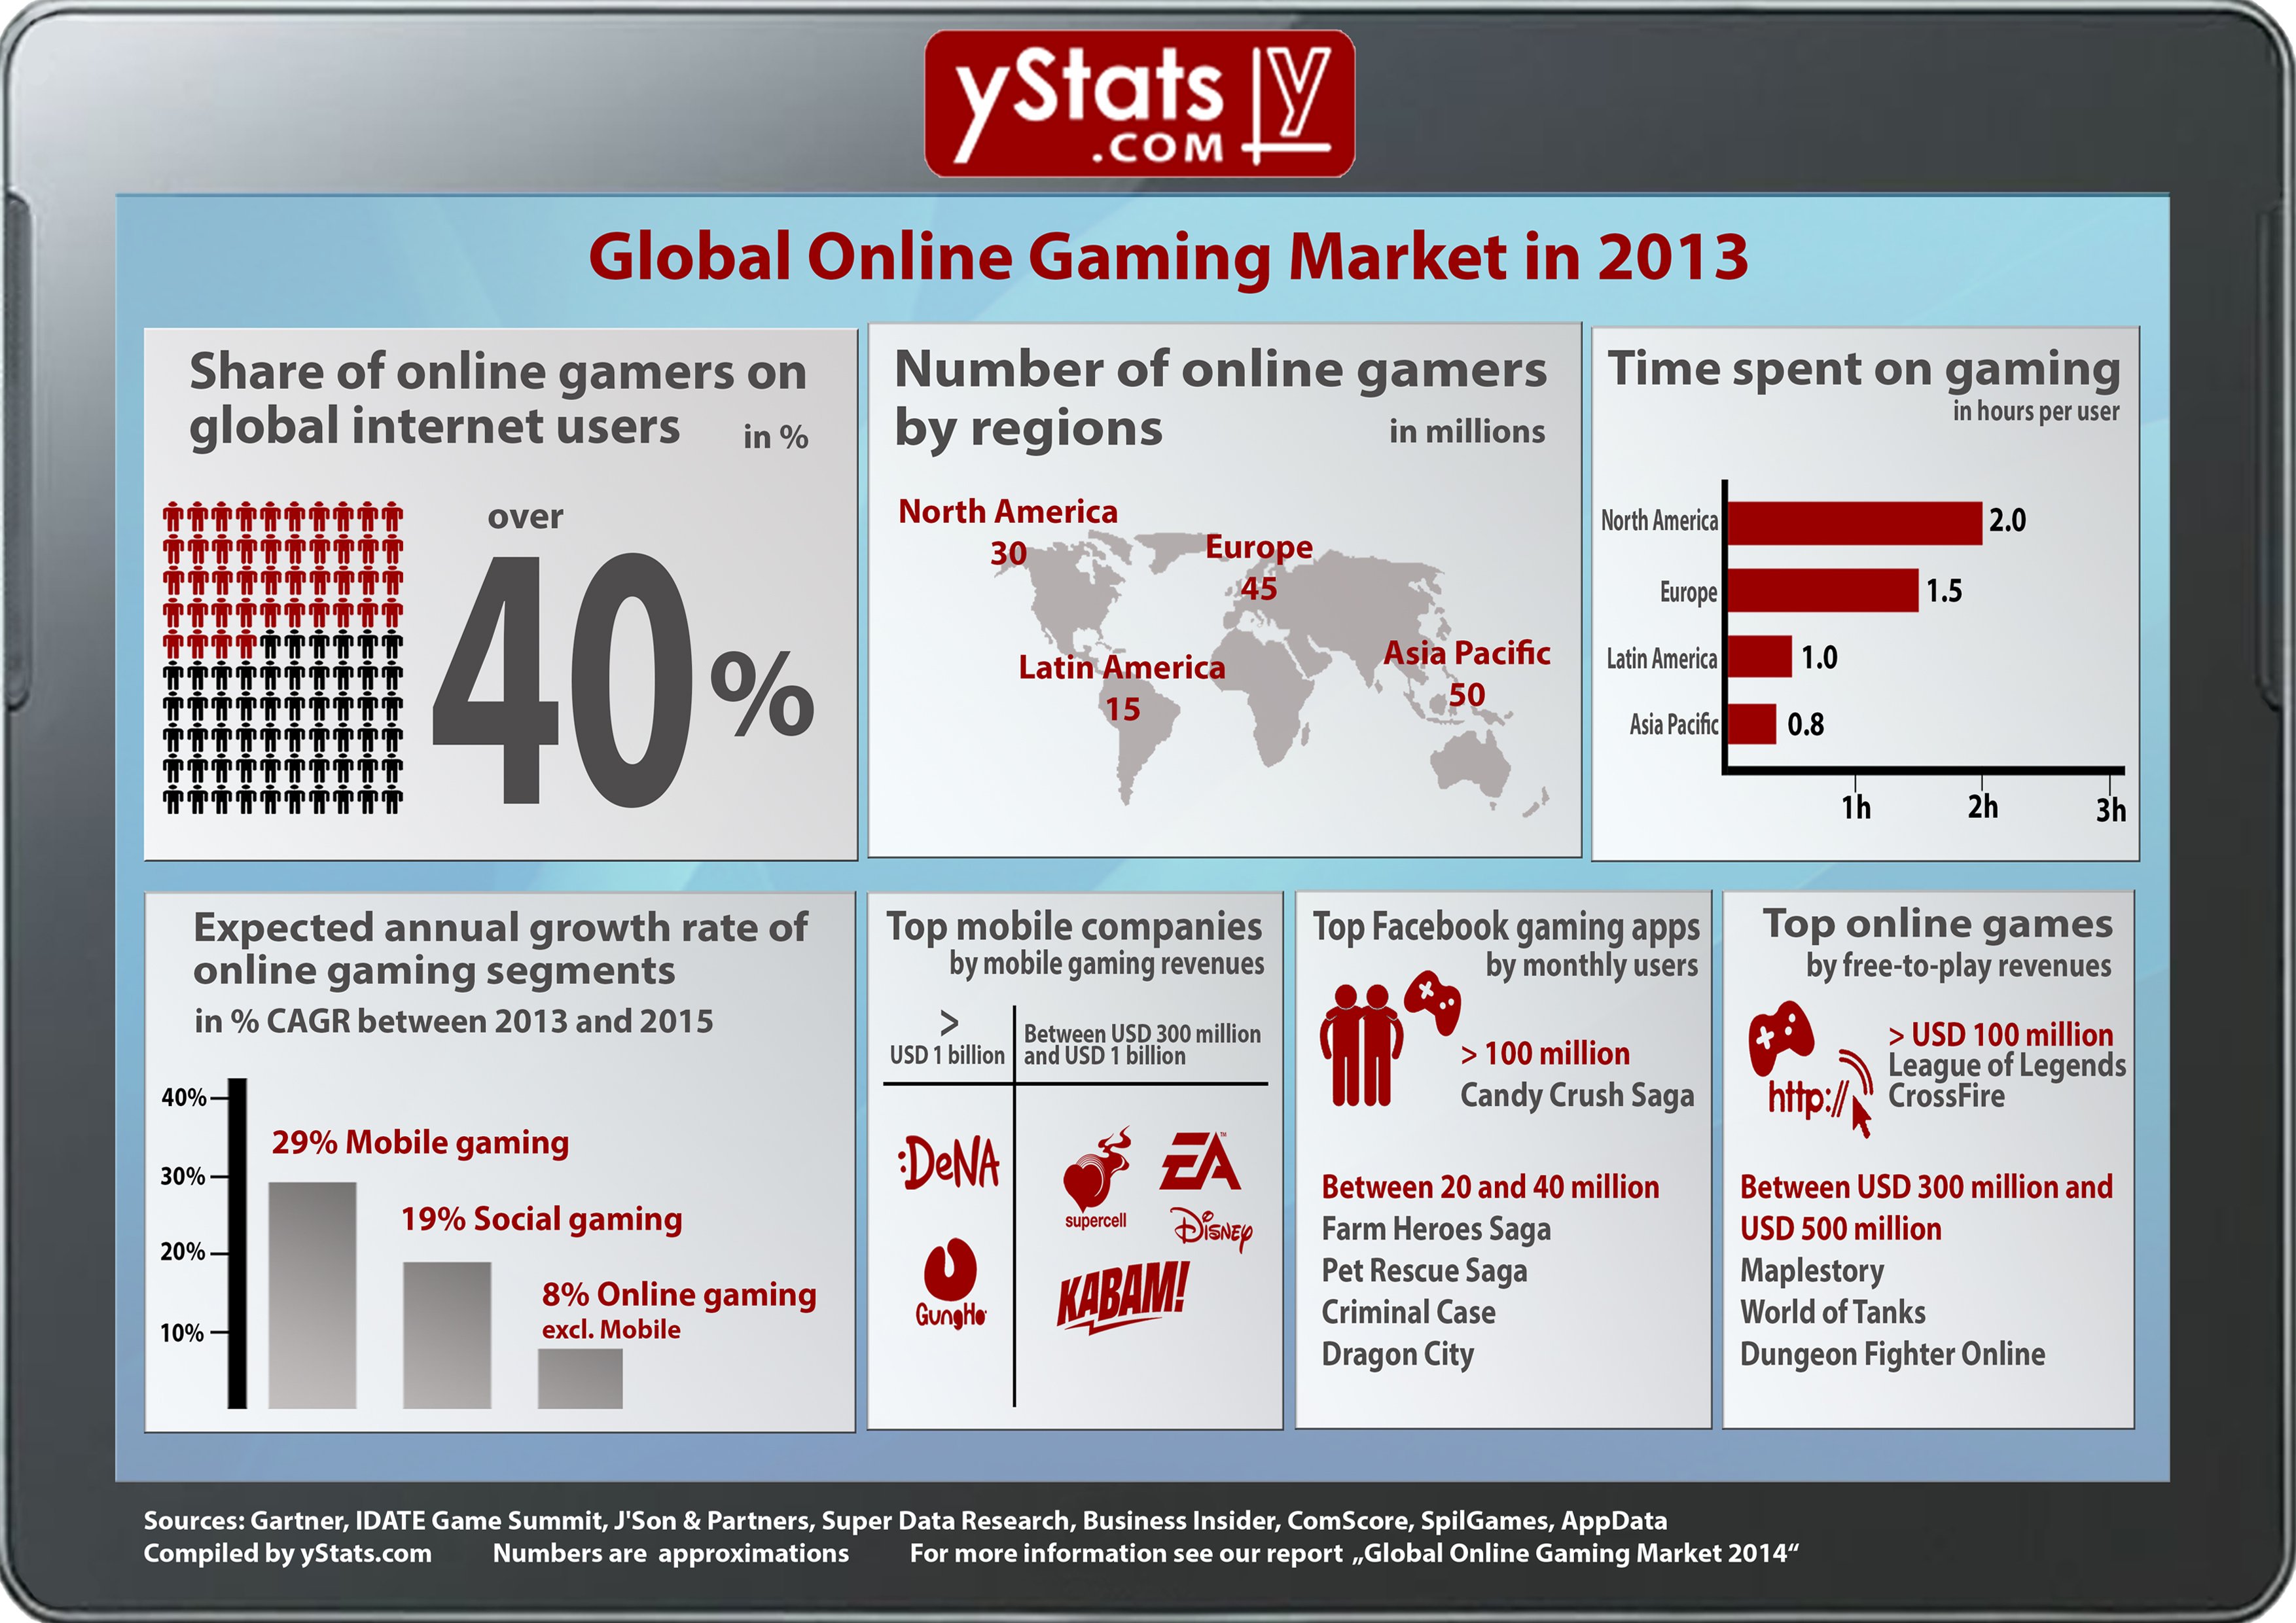 Social & Mobile Games Spur Growth of Online Gaming Market